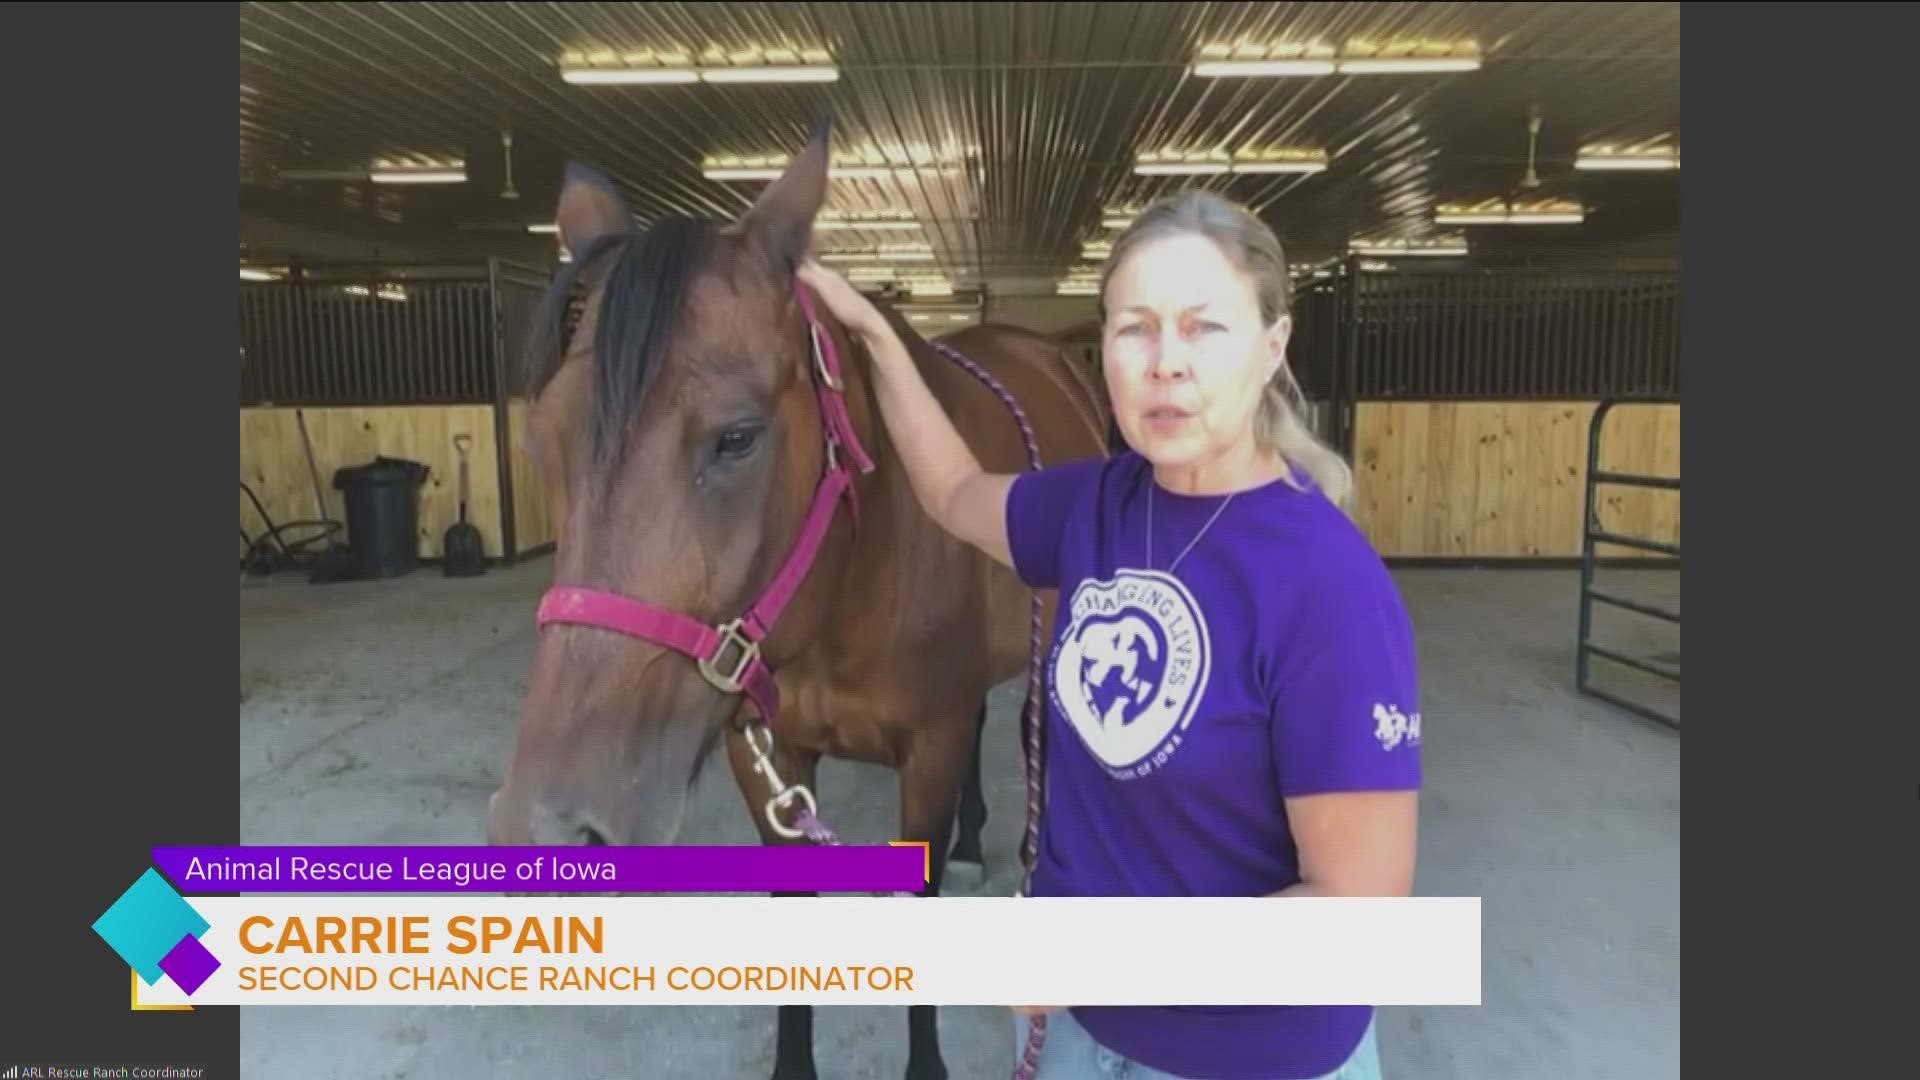 Carrie Spain, Animal Rescue League of Iowa Second Chance Ranch Coordinator, visits with Arani, a 16 year old horse in need of a new corral to call home.